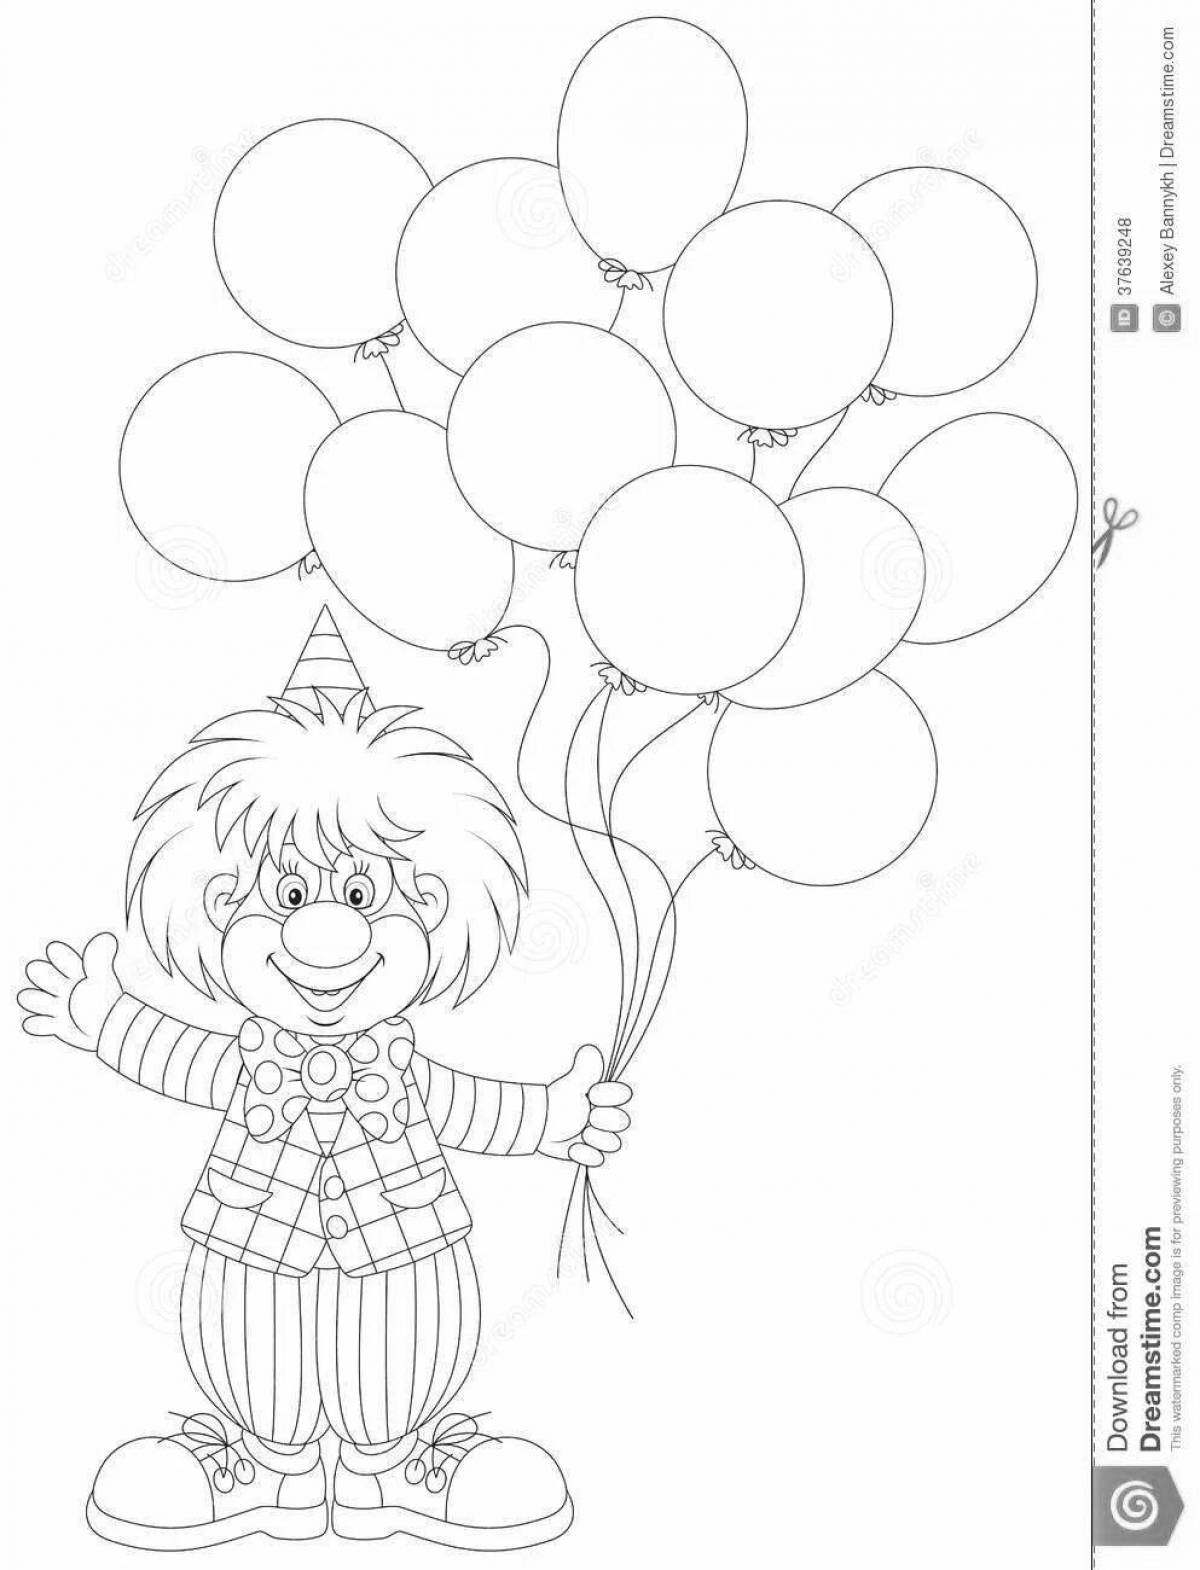 Animated clown with balloons